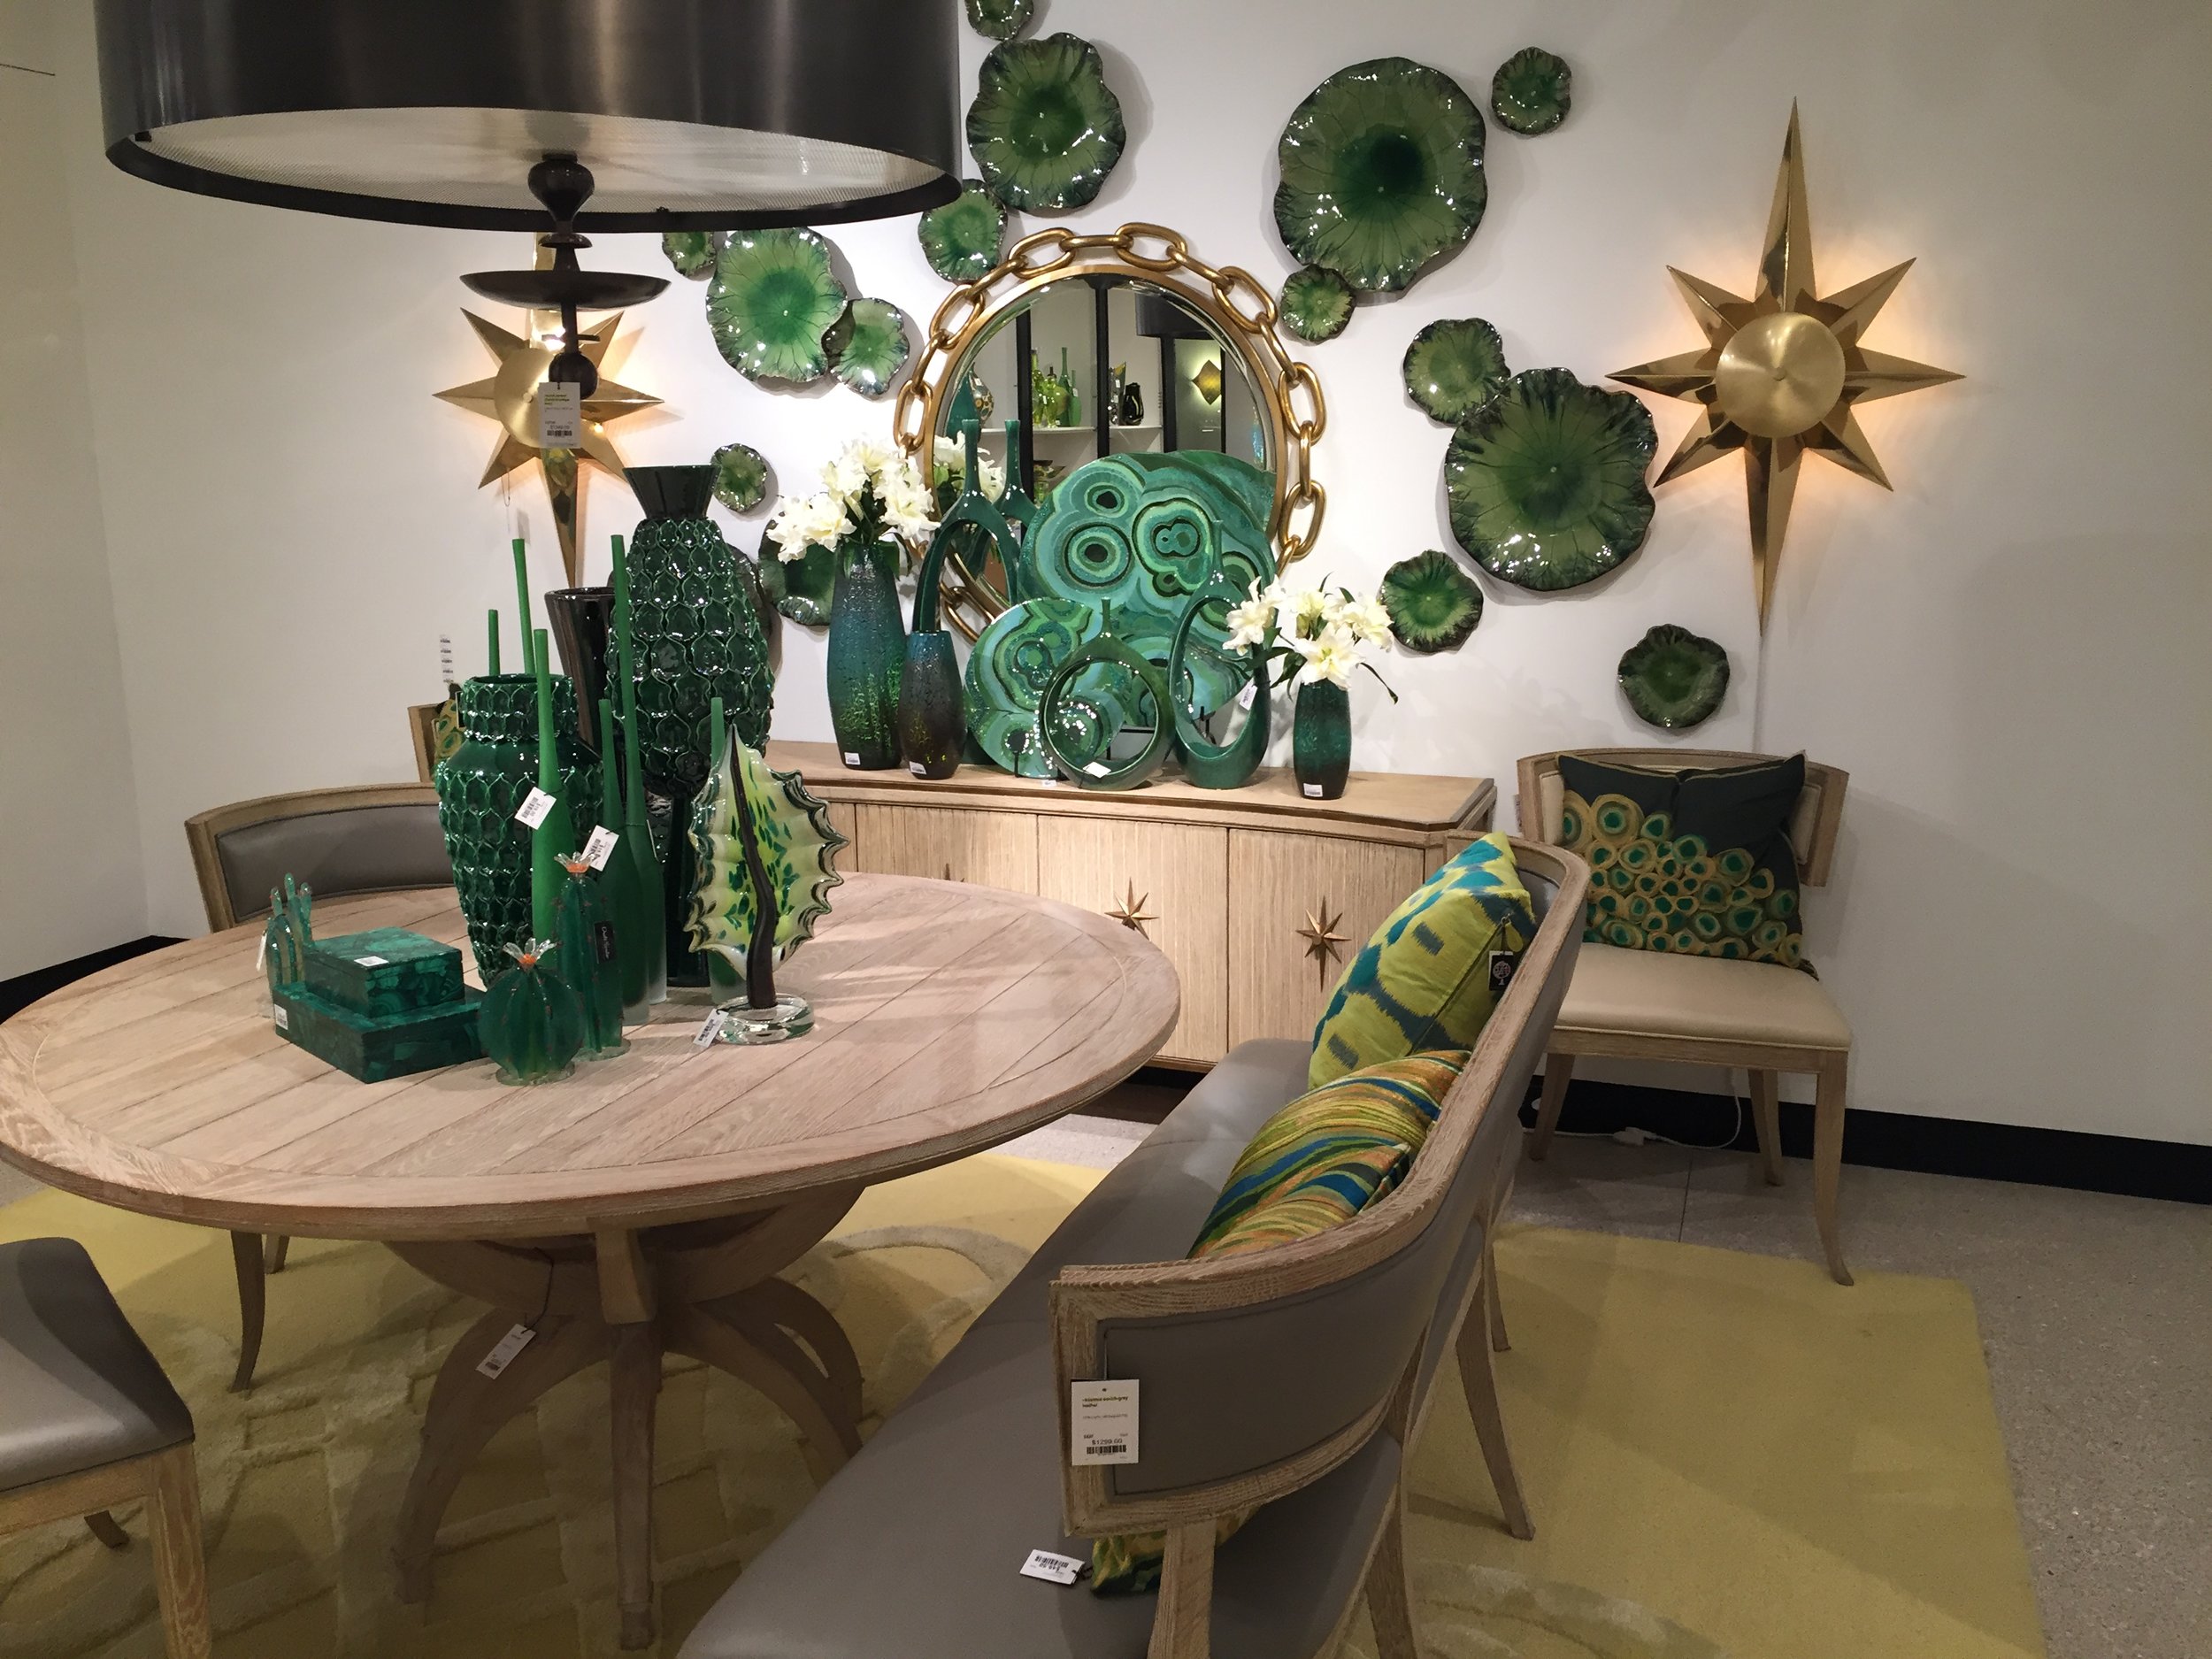 How dramatic! Love this space using shades of green from Global Views showroom.